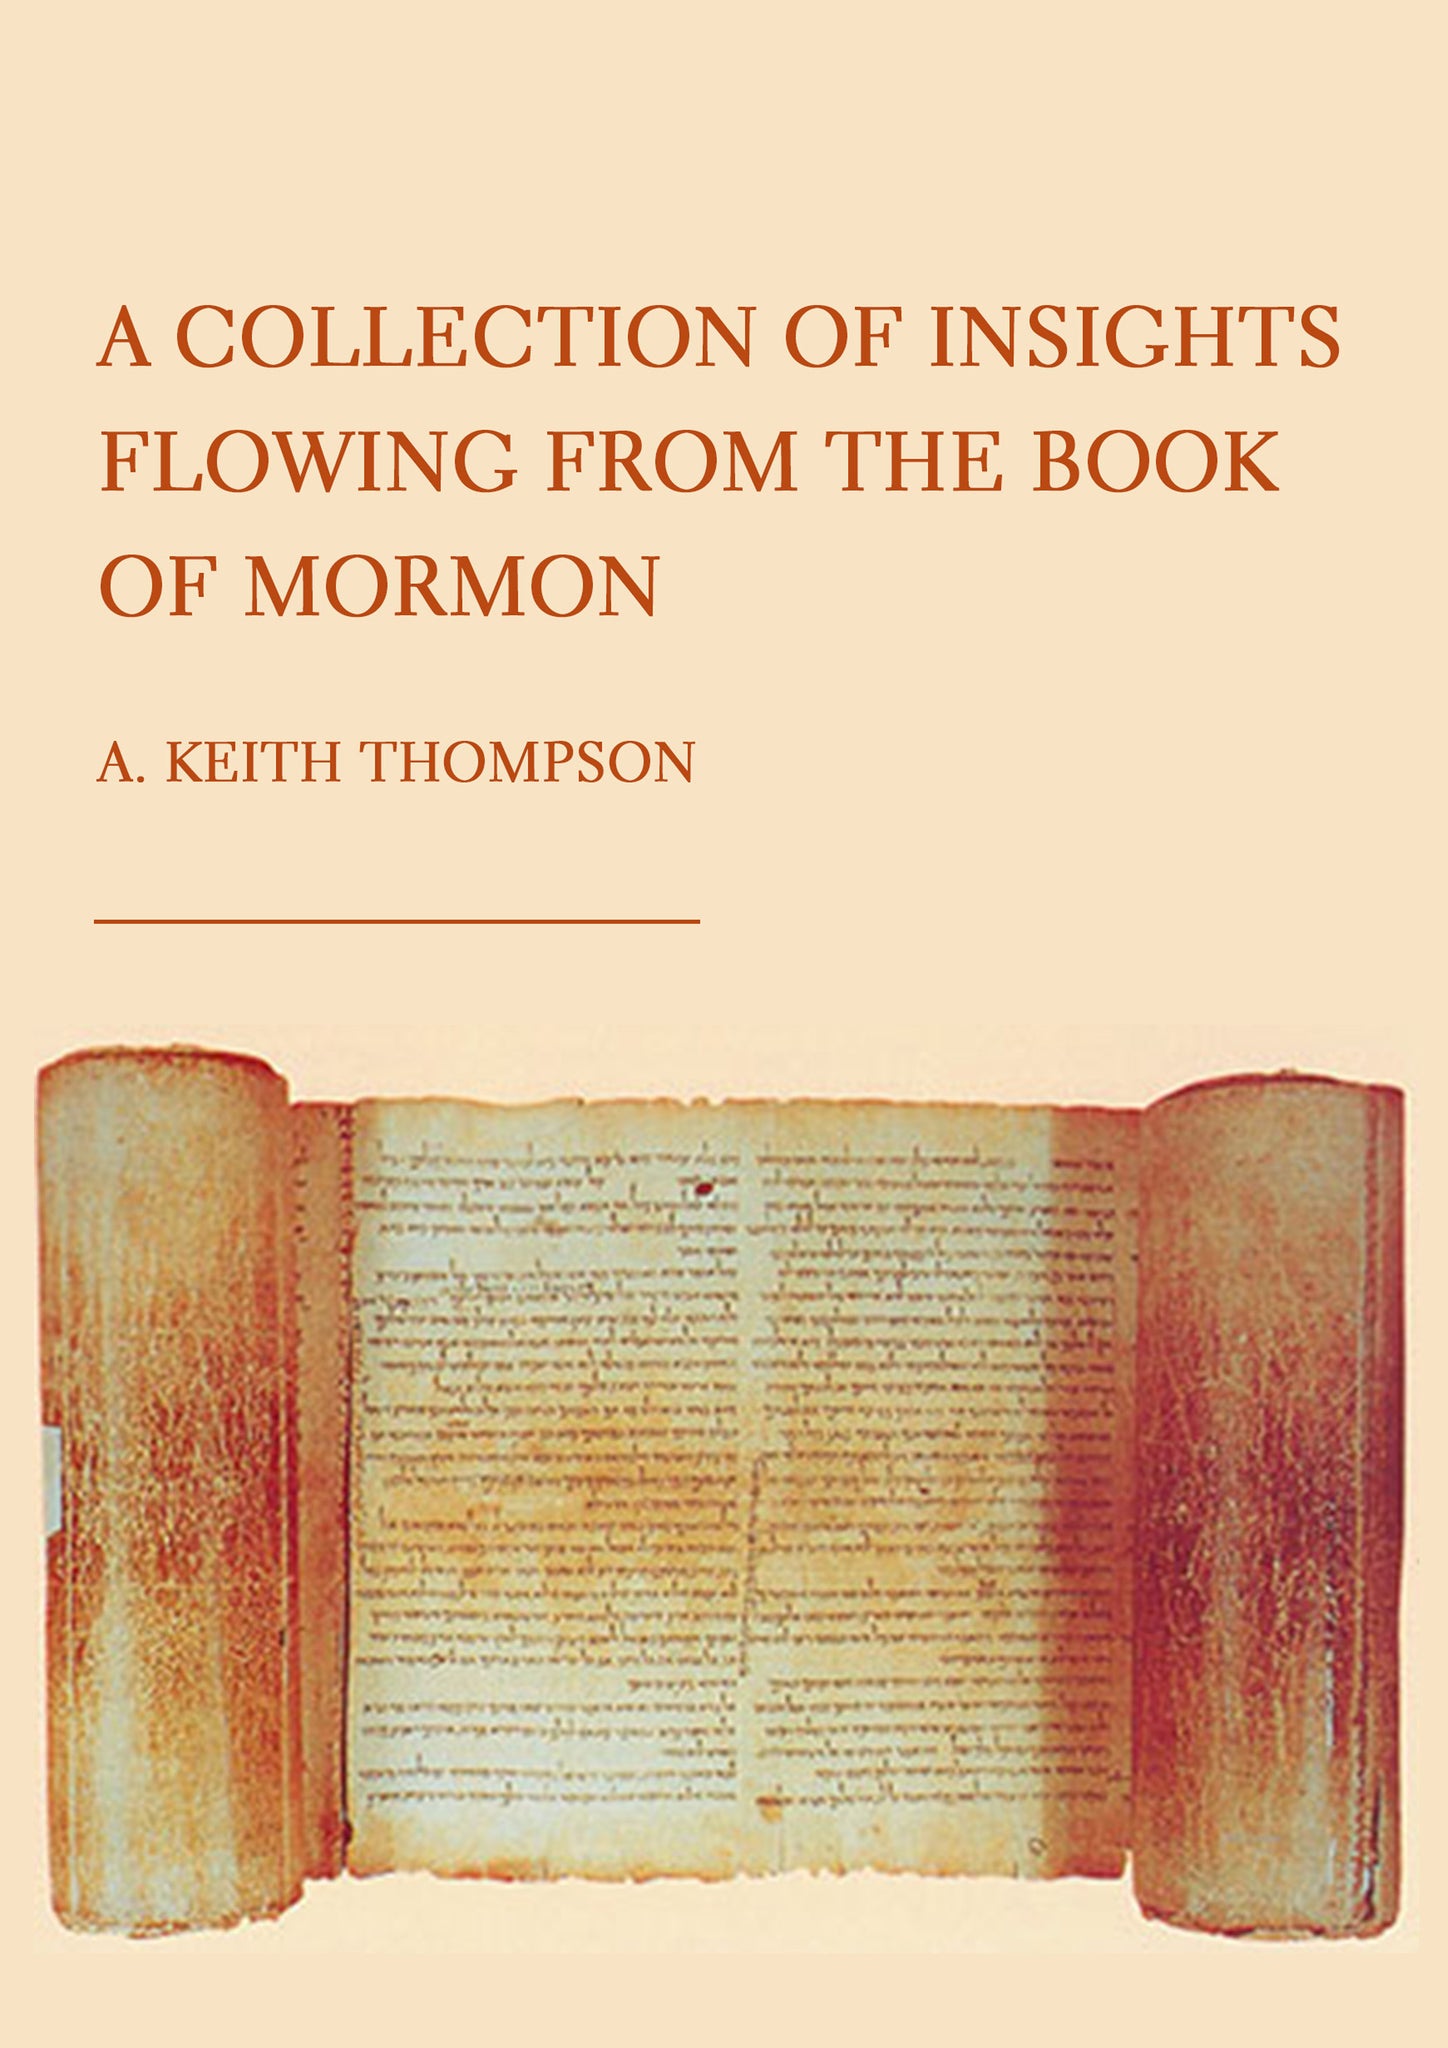 A Collection of Insights Flowing from The Book of Mormon